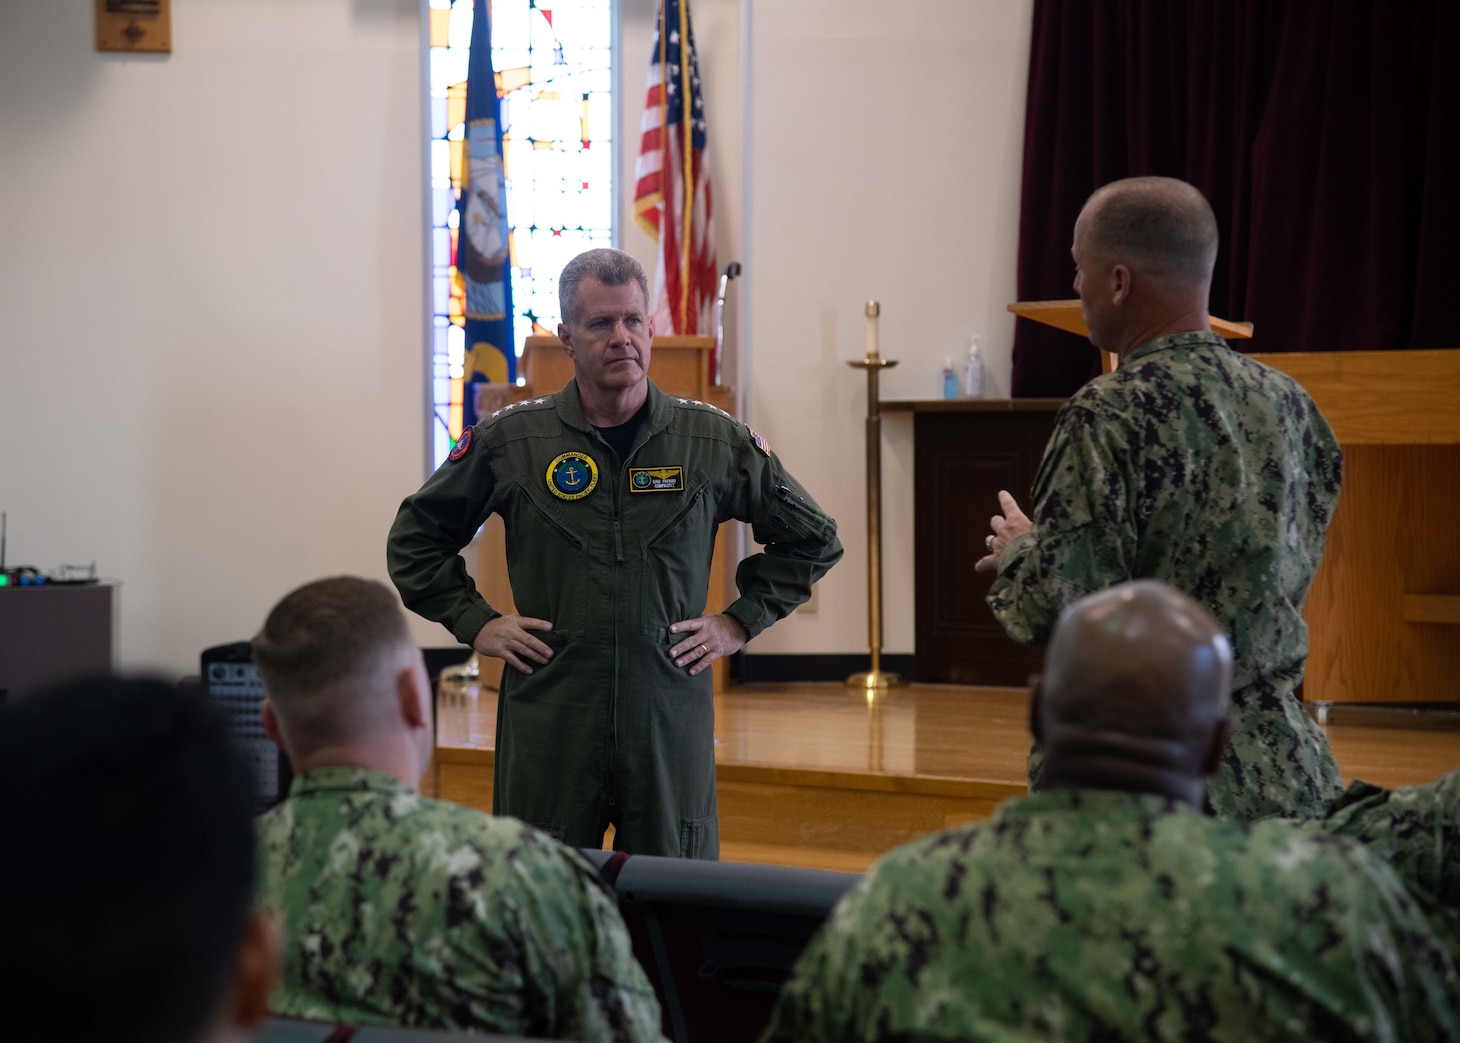 SASEBO, Japan (June 9, 2021) – Commander, U.S. Pacific Fleet Adm. Sam Paparo speaks to Forward Deployed Naval Forces, Commander, Fleet Activities Sasebo and tenant command leadership onboard CFAS June 9, 2021. Paparo visited CFAS during his first visit to Japan to review the contributions of Sasebo based units to U.S. Pacific Fleet's mission and meet with local political leaders and Japan Self-Defense Force partners. (U.S. Navy photo by Mass Communication Specialist 3rd Class Jasmine Ikusebiala)